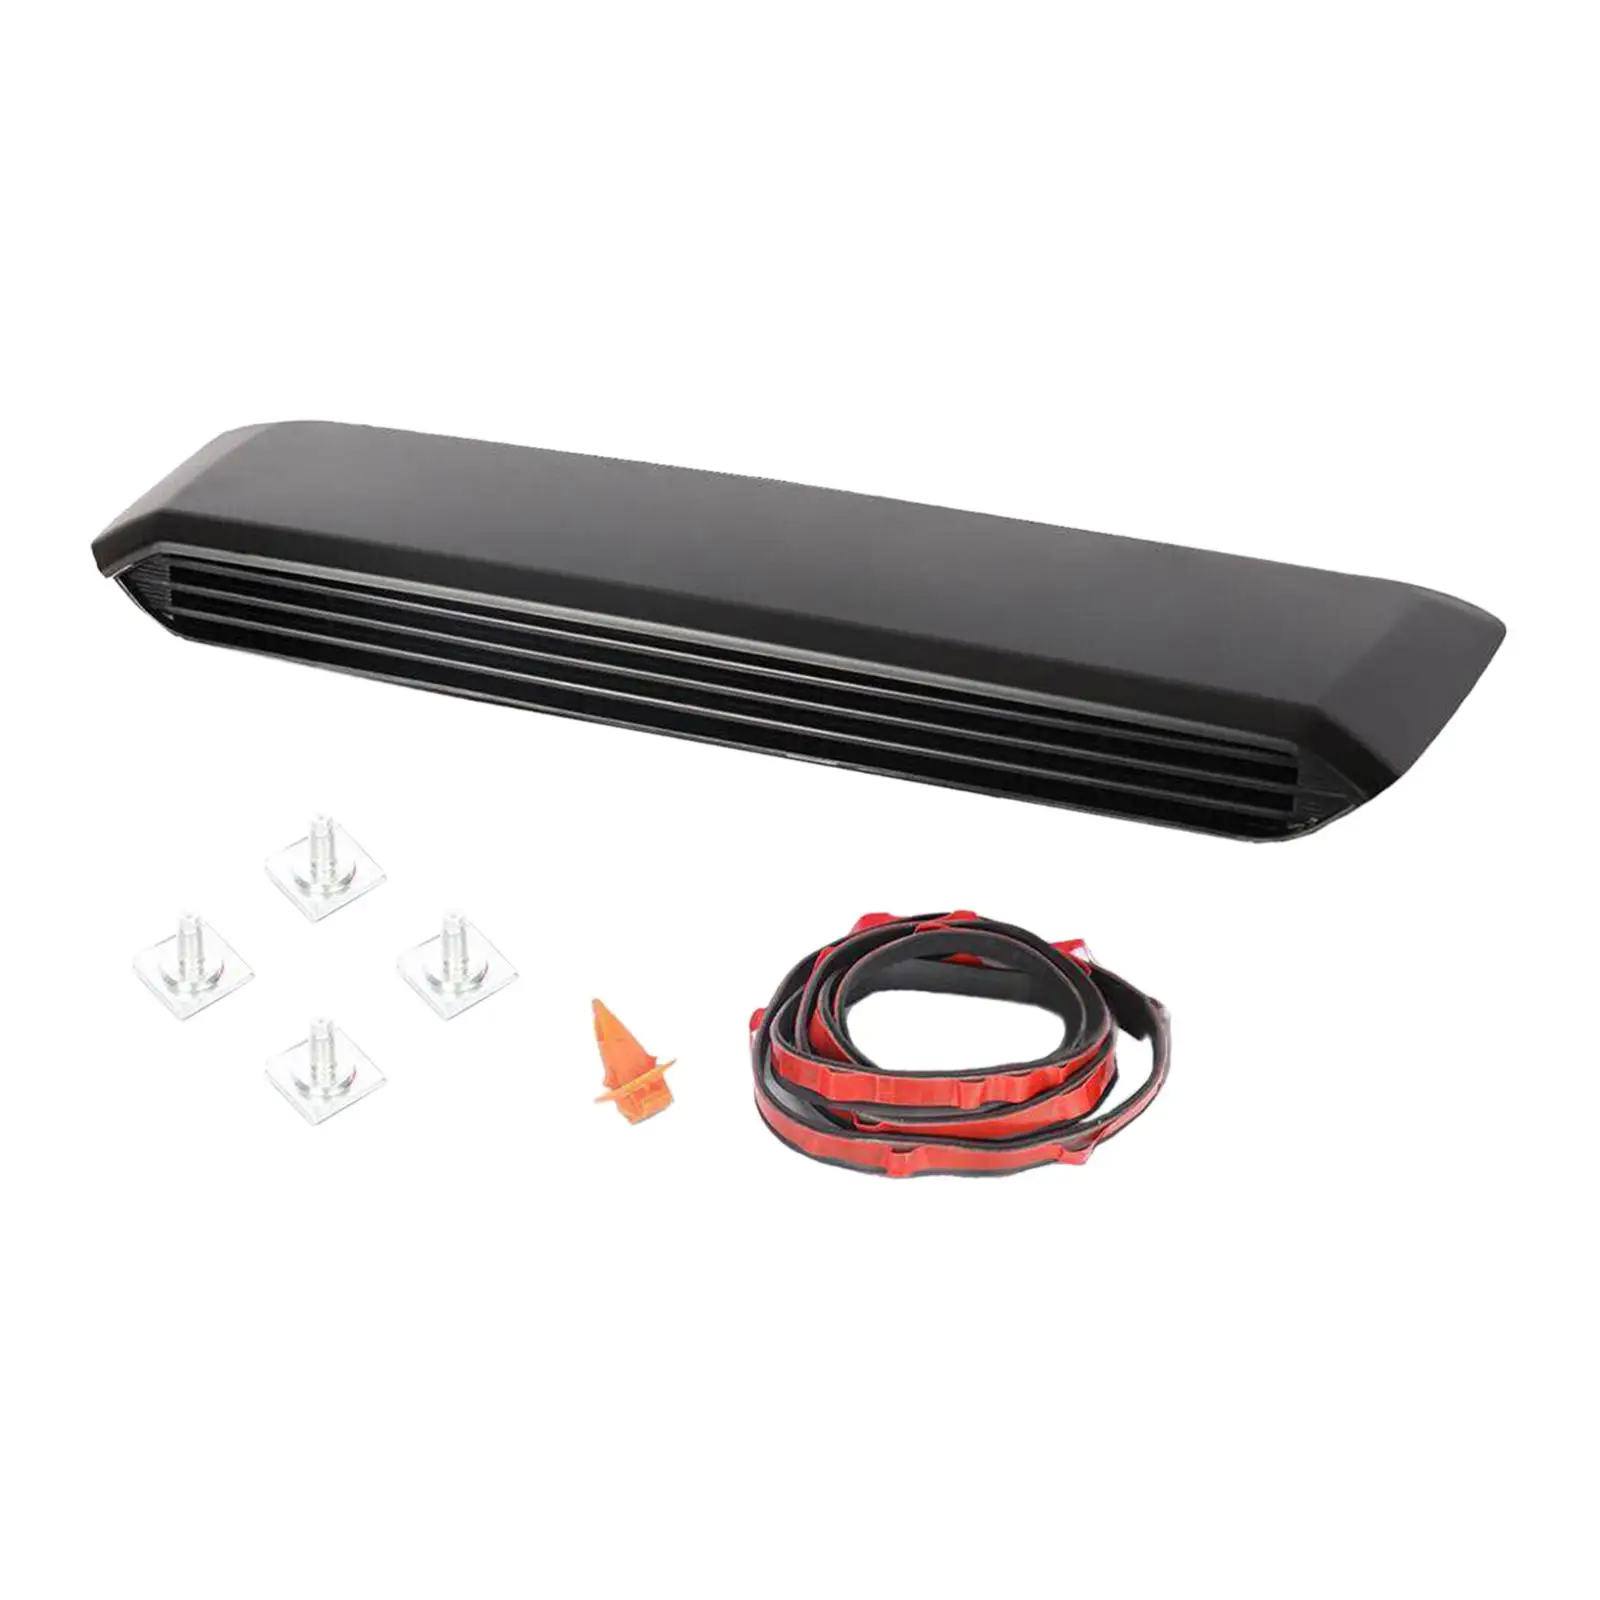 Hood Scoop Kit High Performance 76181-04900 for Toyota for tacoma